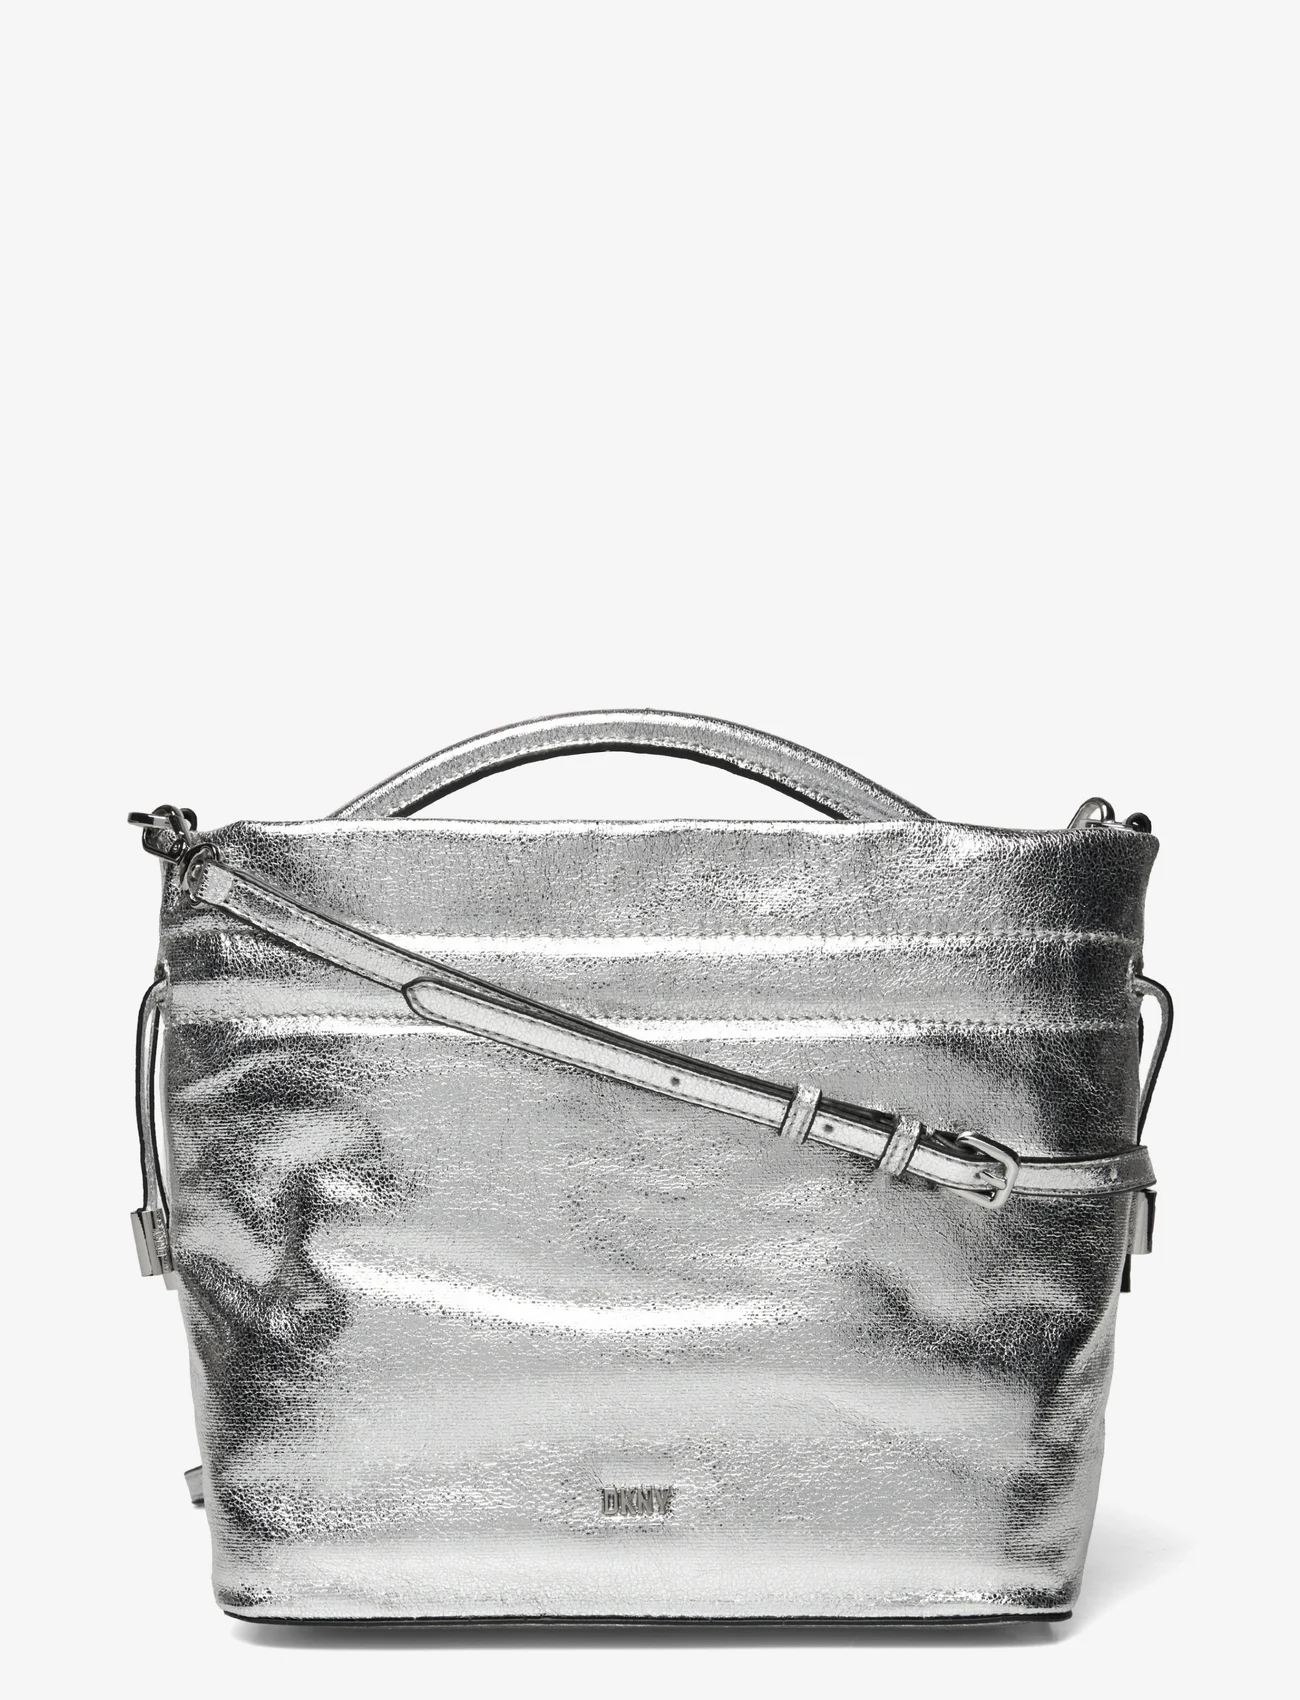 DKNY Bags - FEVEN TH CBODY - juhlamuotia outlet-hintaan - sil - silver - 0